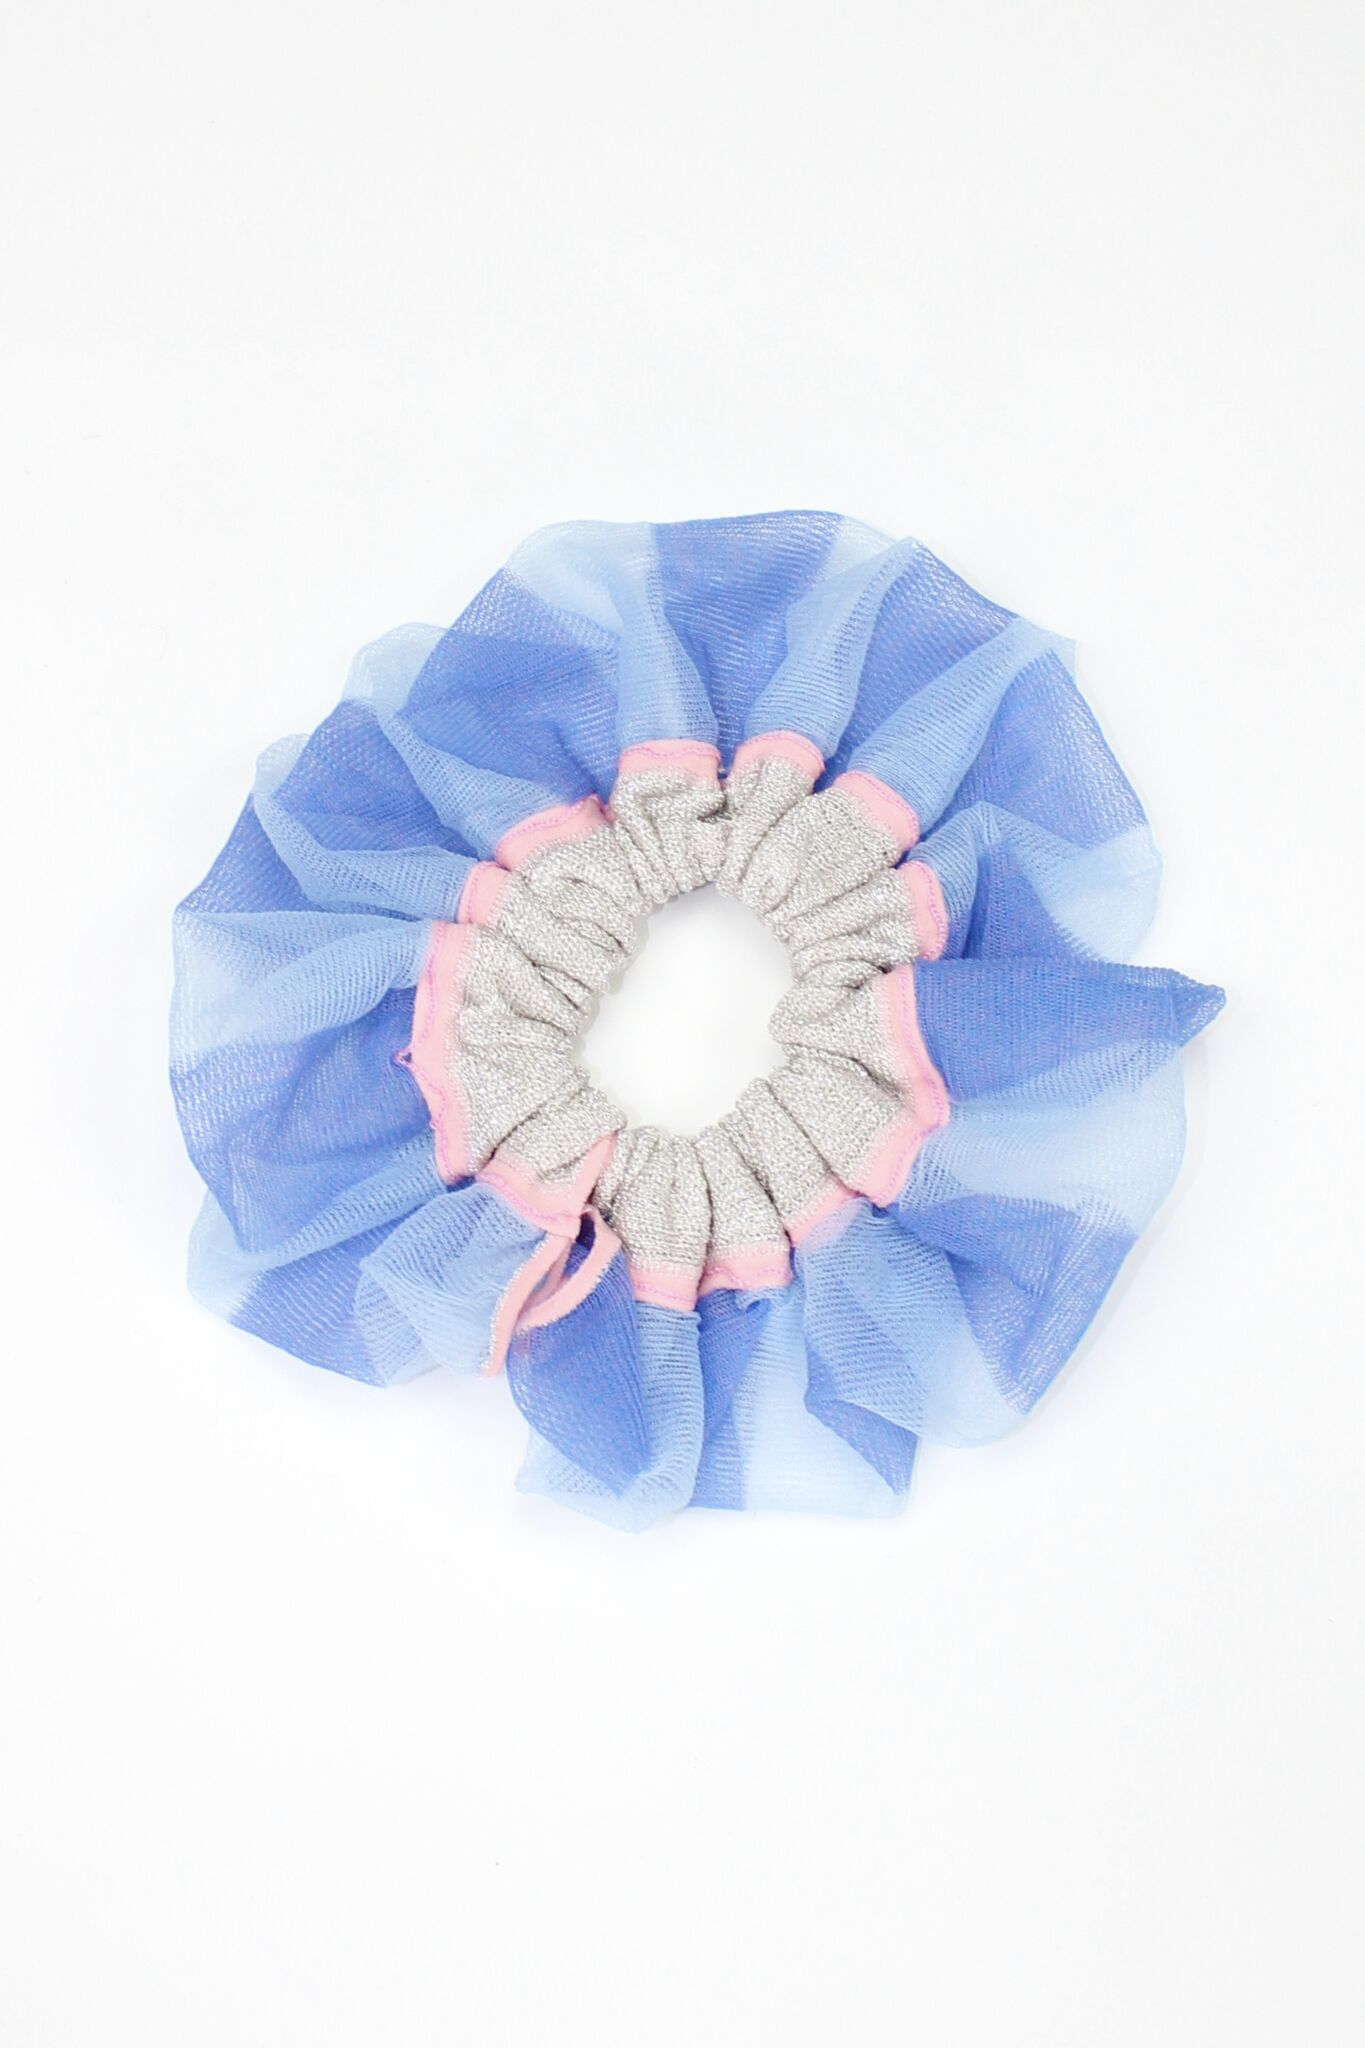 Petunia Scrunchie in powder blue and pink is a knitted scrunchie in bold stripes. Made of transparent and shimmery yarns.